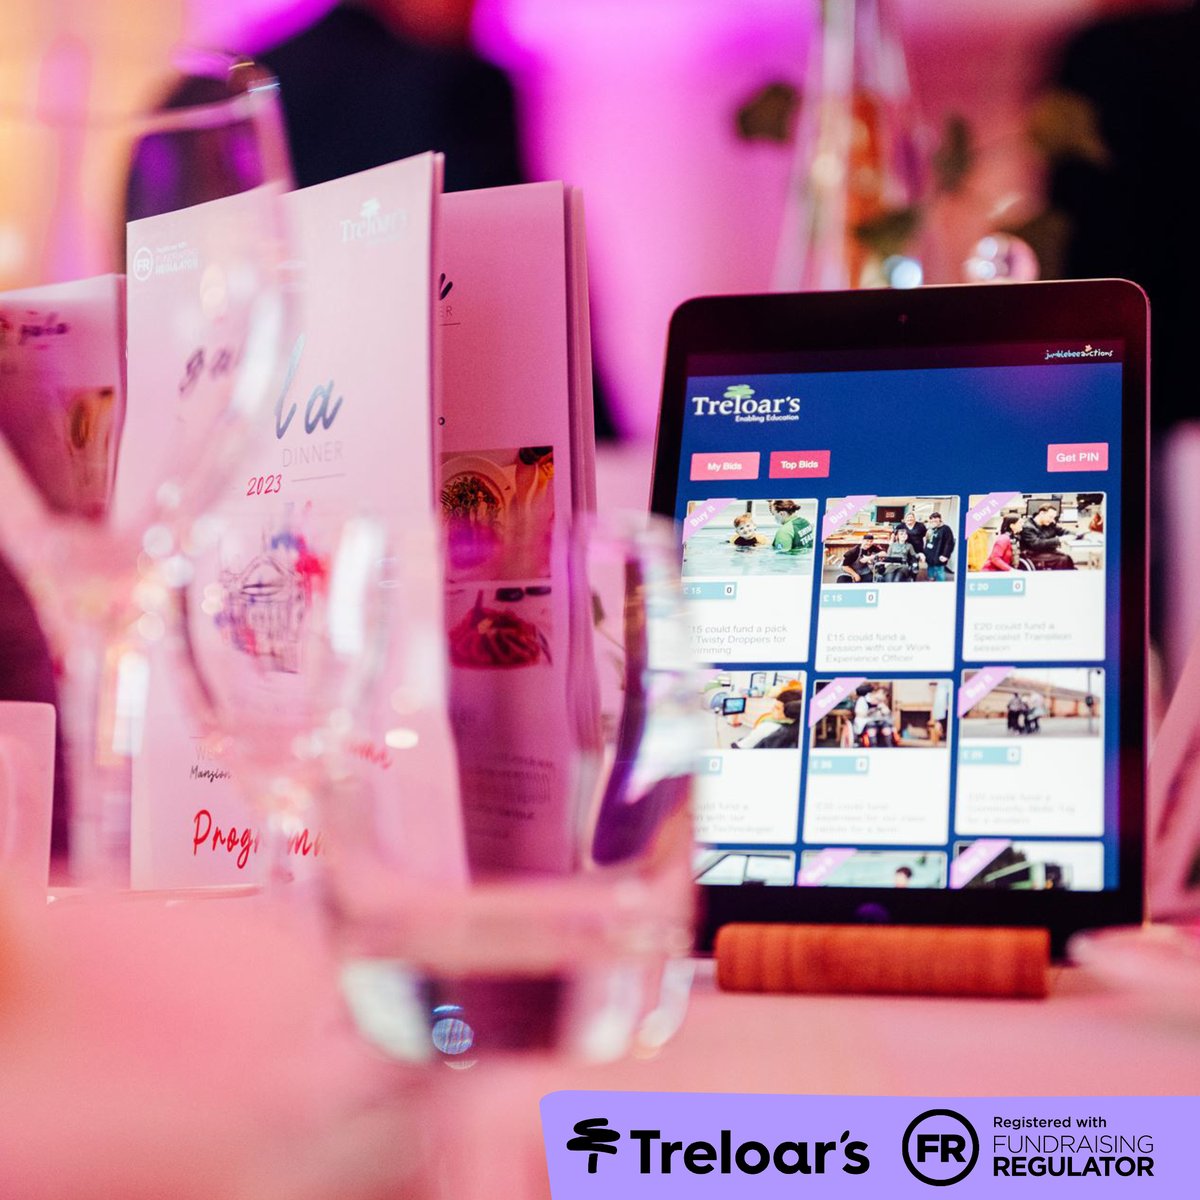 Our Gala Dinner at Mansion House is just one week away, but the excitement starts now! Can't make it to our sold out event? No worries! We're kicking off the silent auction early, so you can still join in on the fun and support Treloar’s! appv2.goinggone.io/treloarsgaladi…